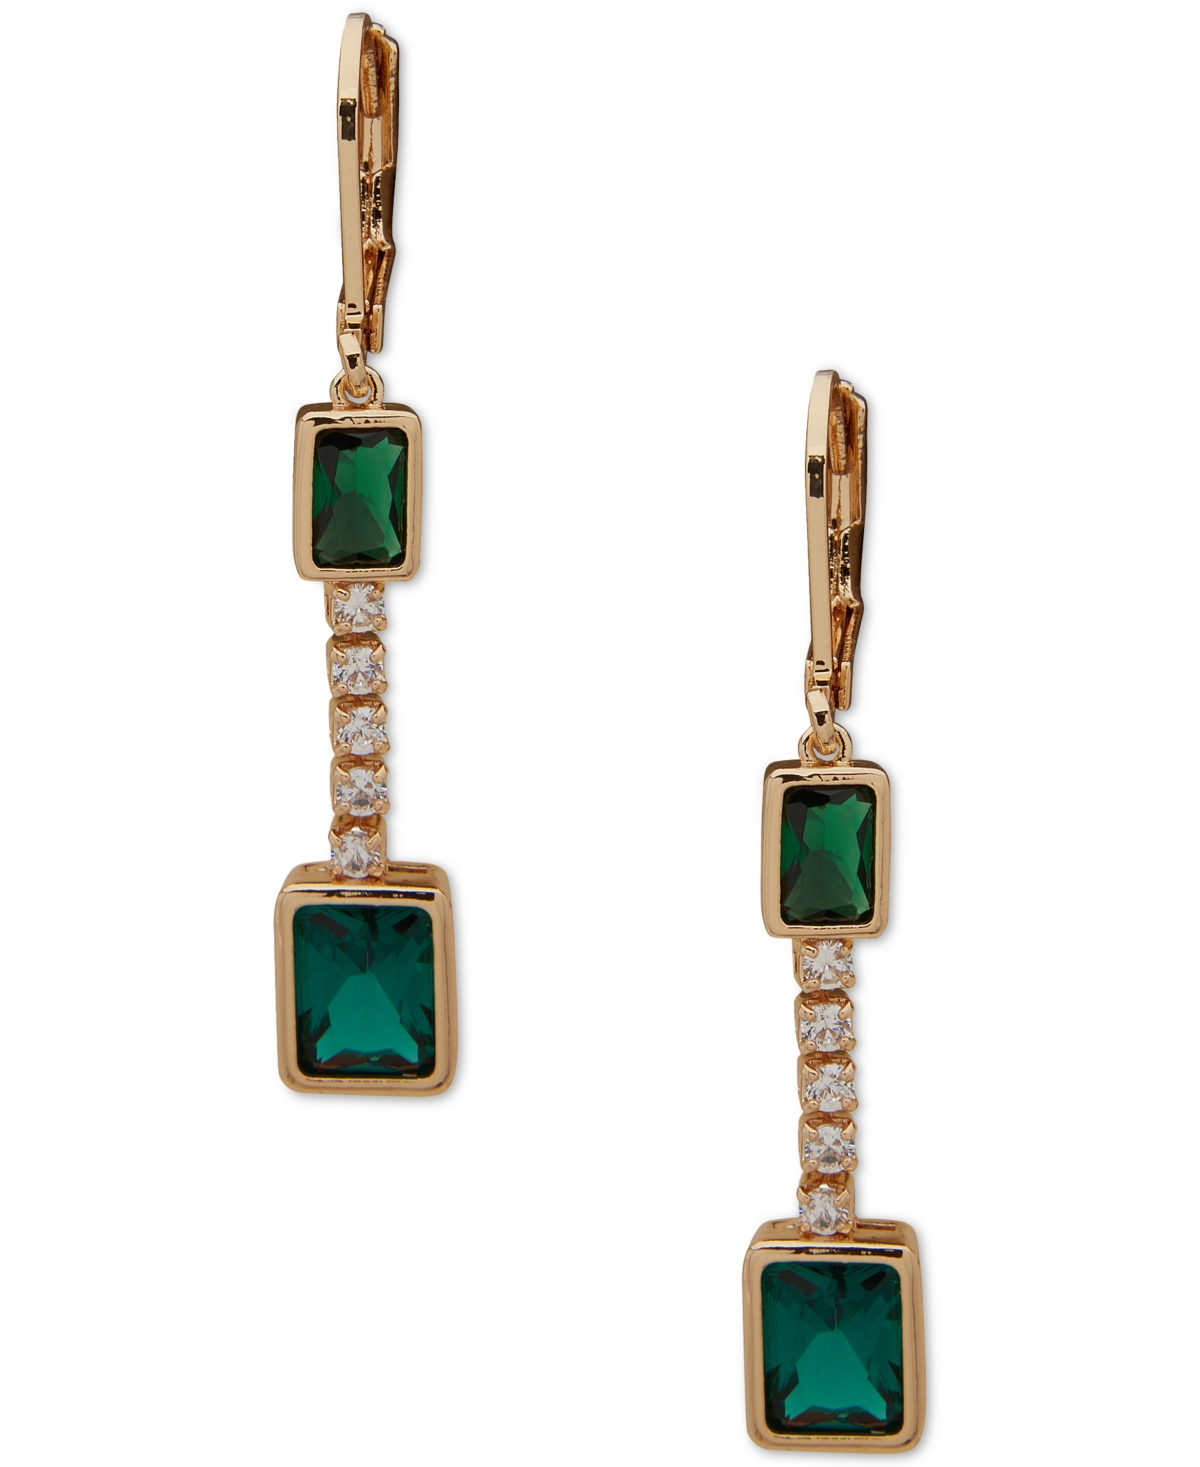 Gold-Tone Pave Crystal Square Linear Earrings - Green